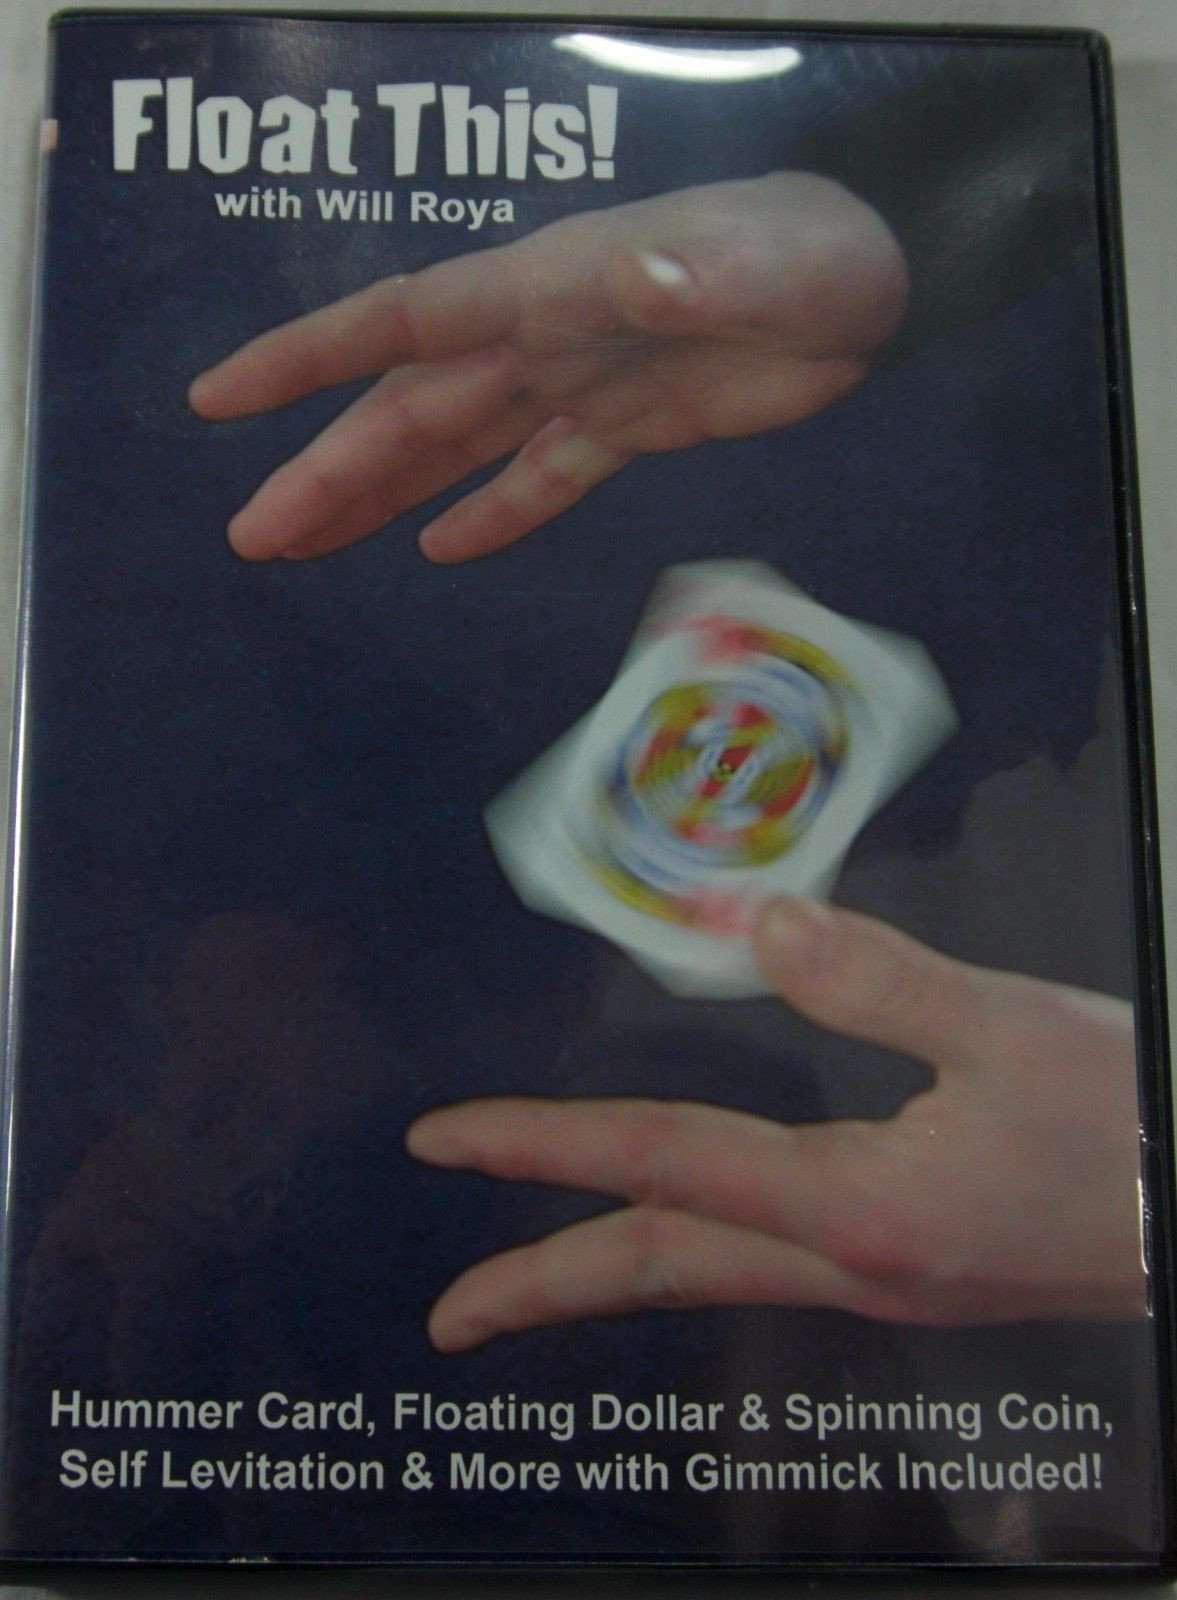 PlayingCardDecks.com-Float This! DVD with Gimmick